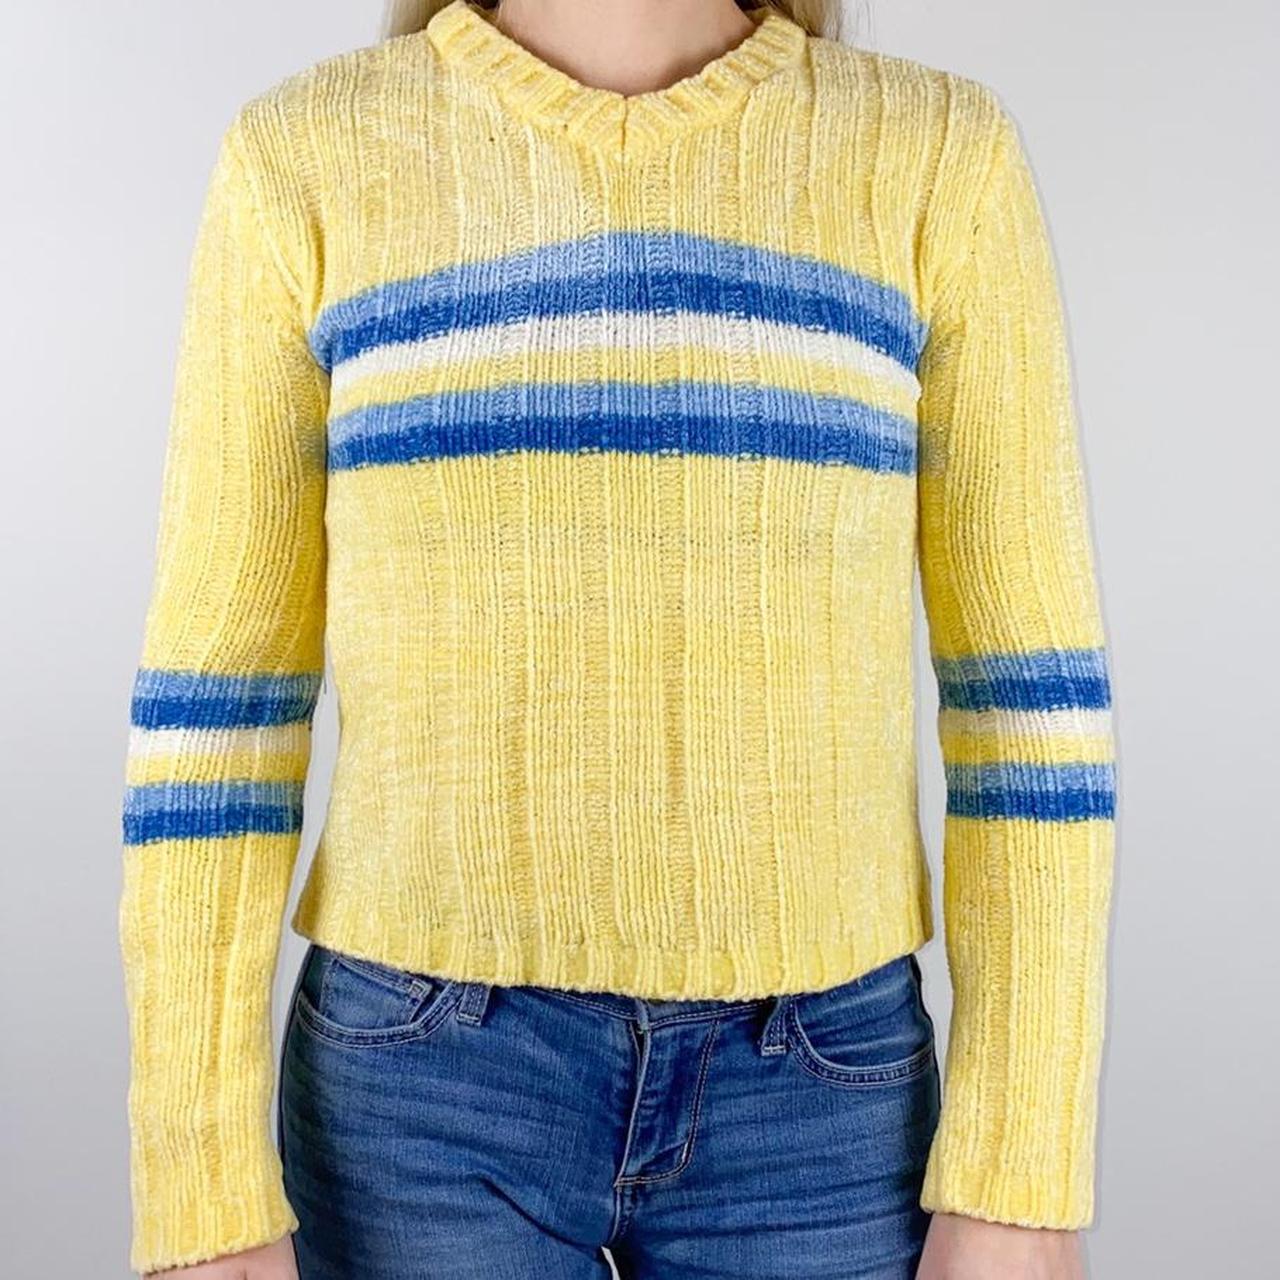 2000s Bright Yellow Striped Sweater 💙 size :... - Depop